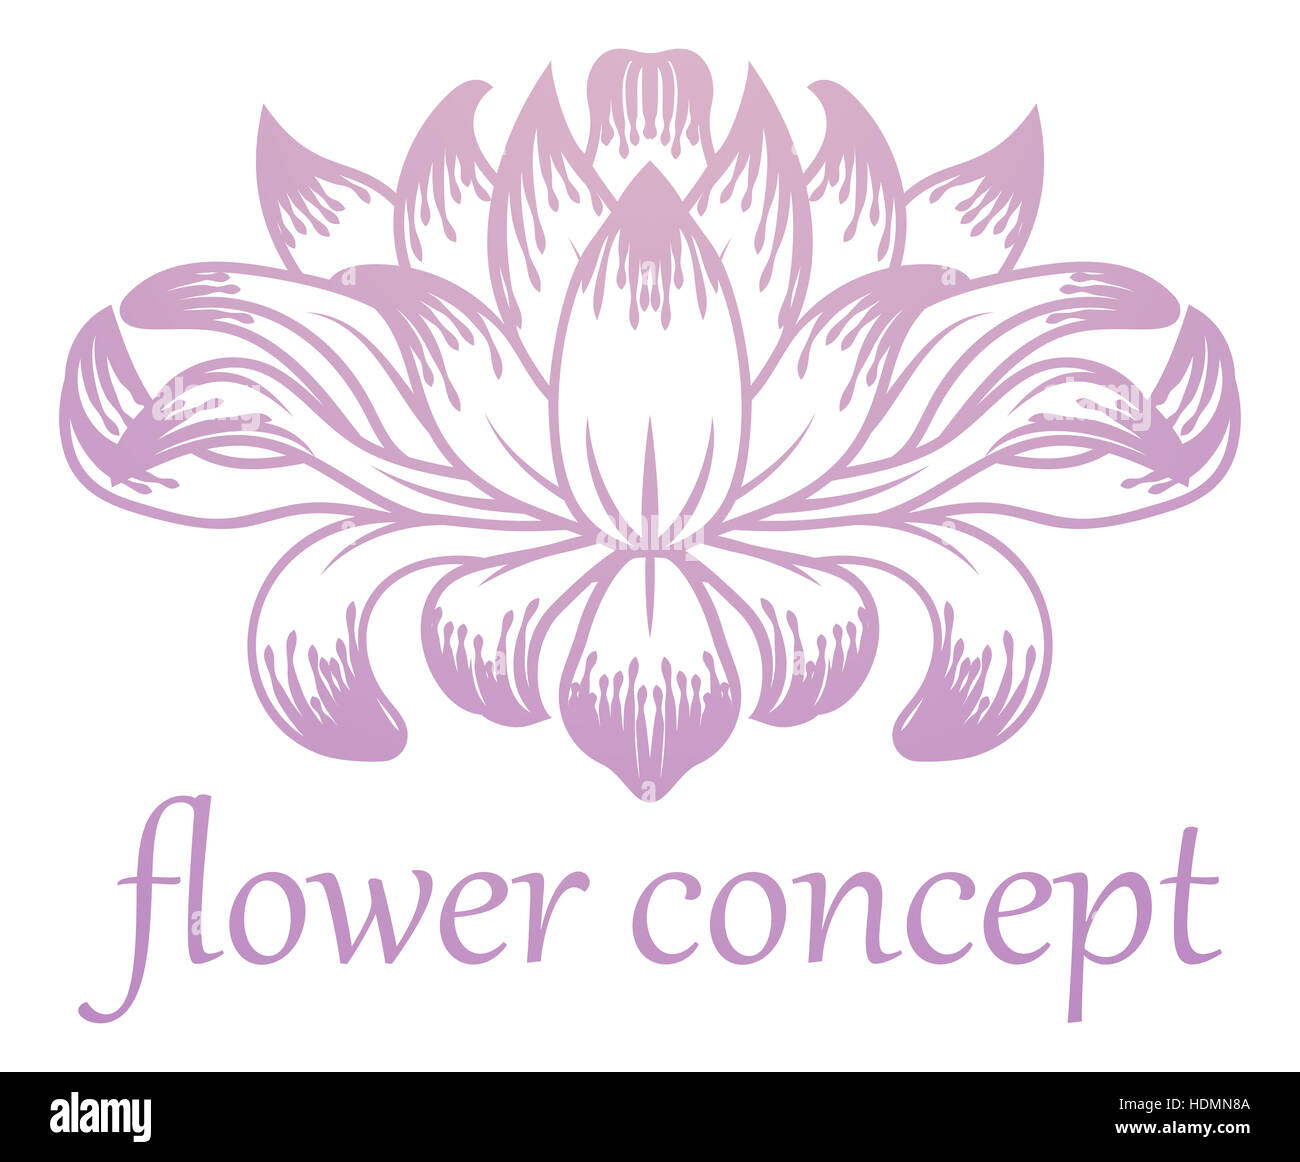 A flower floral abstract design concept icon Stock Photo